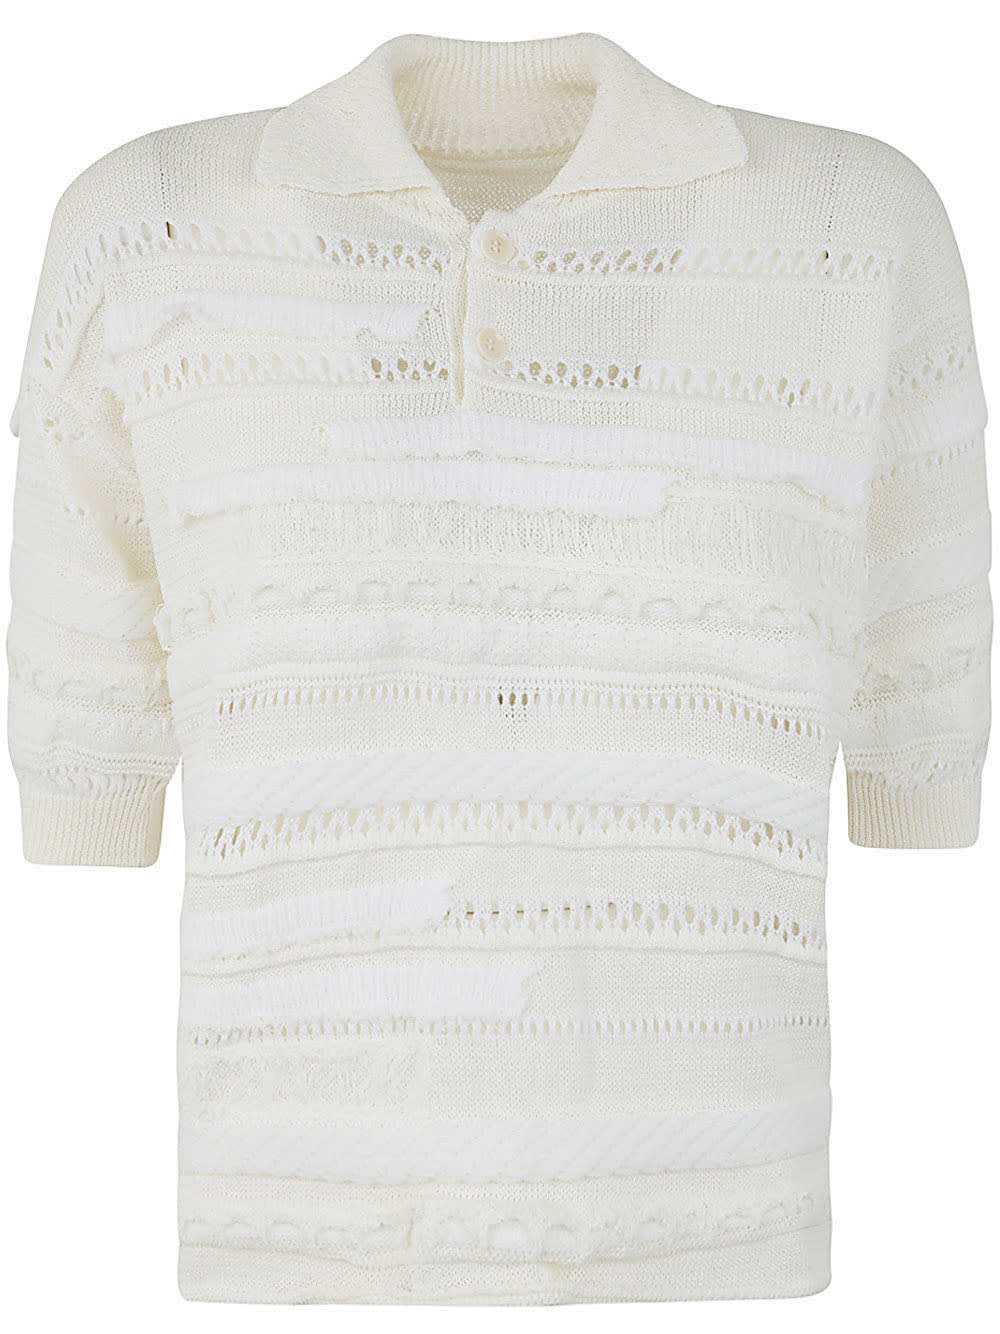 Y's Half Sleeve Pull Over With Collar In White